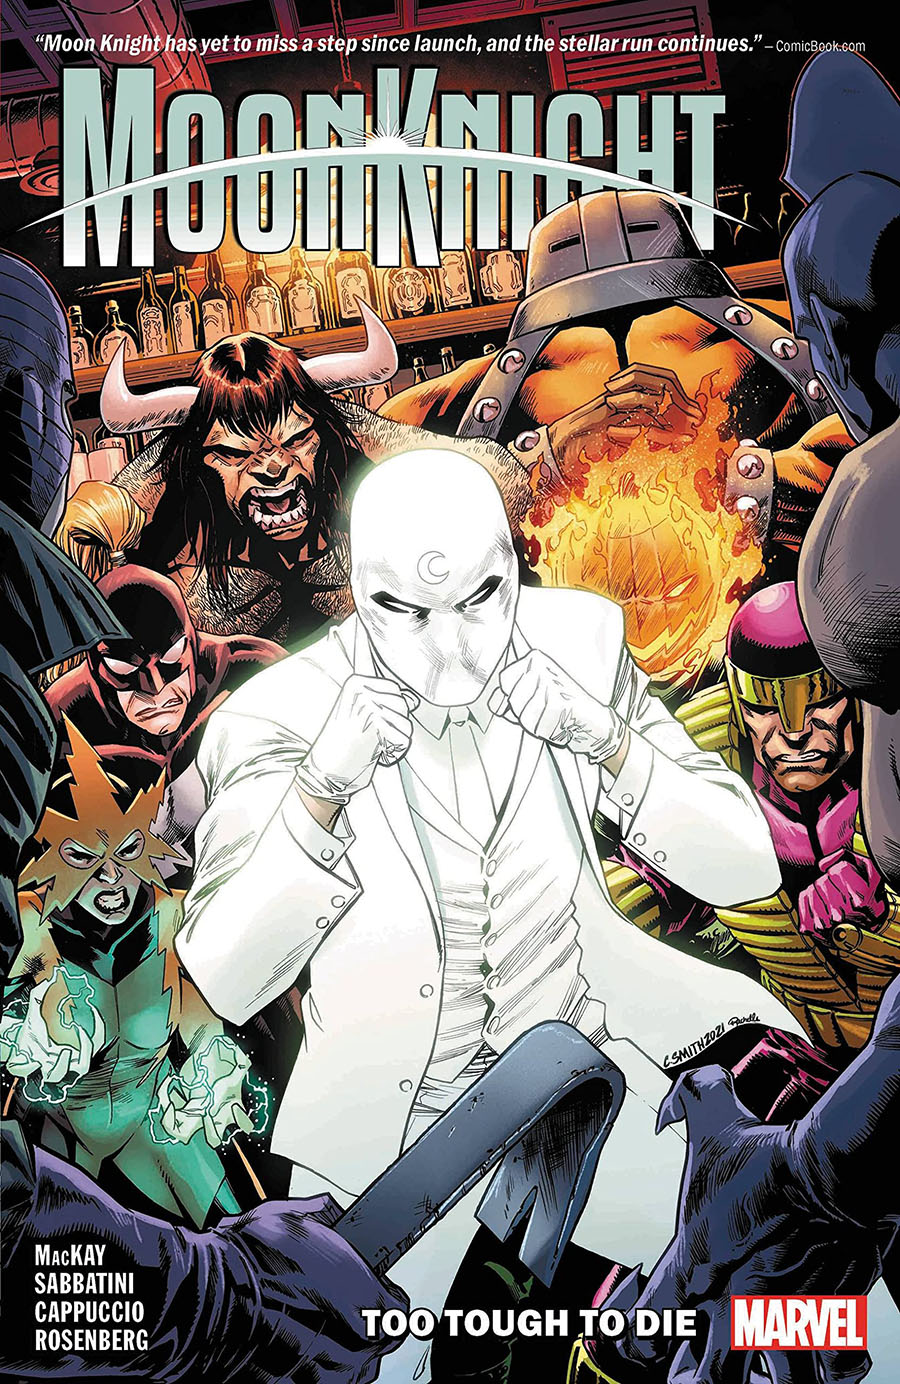 Moon Knight (2021) Vol 2 Too Tough To Die TP